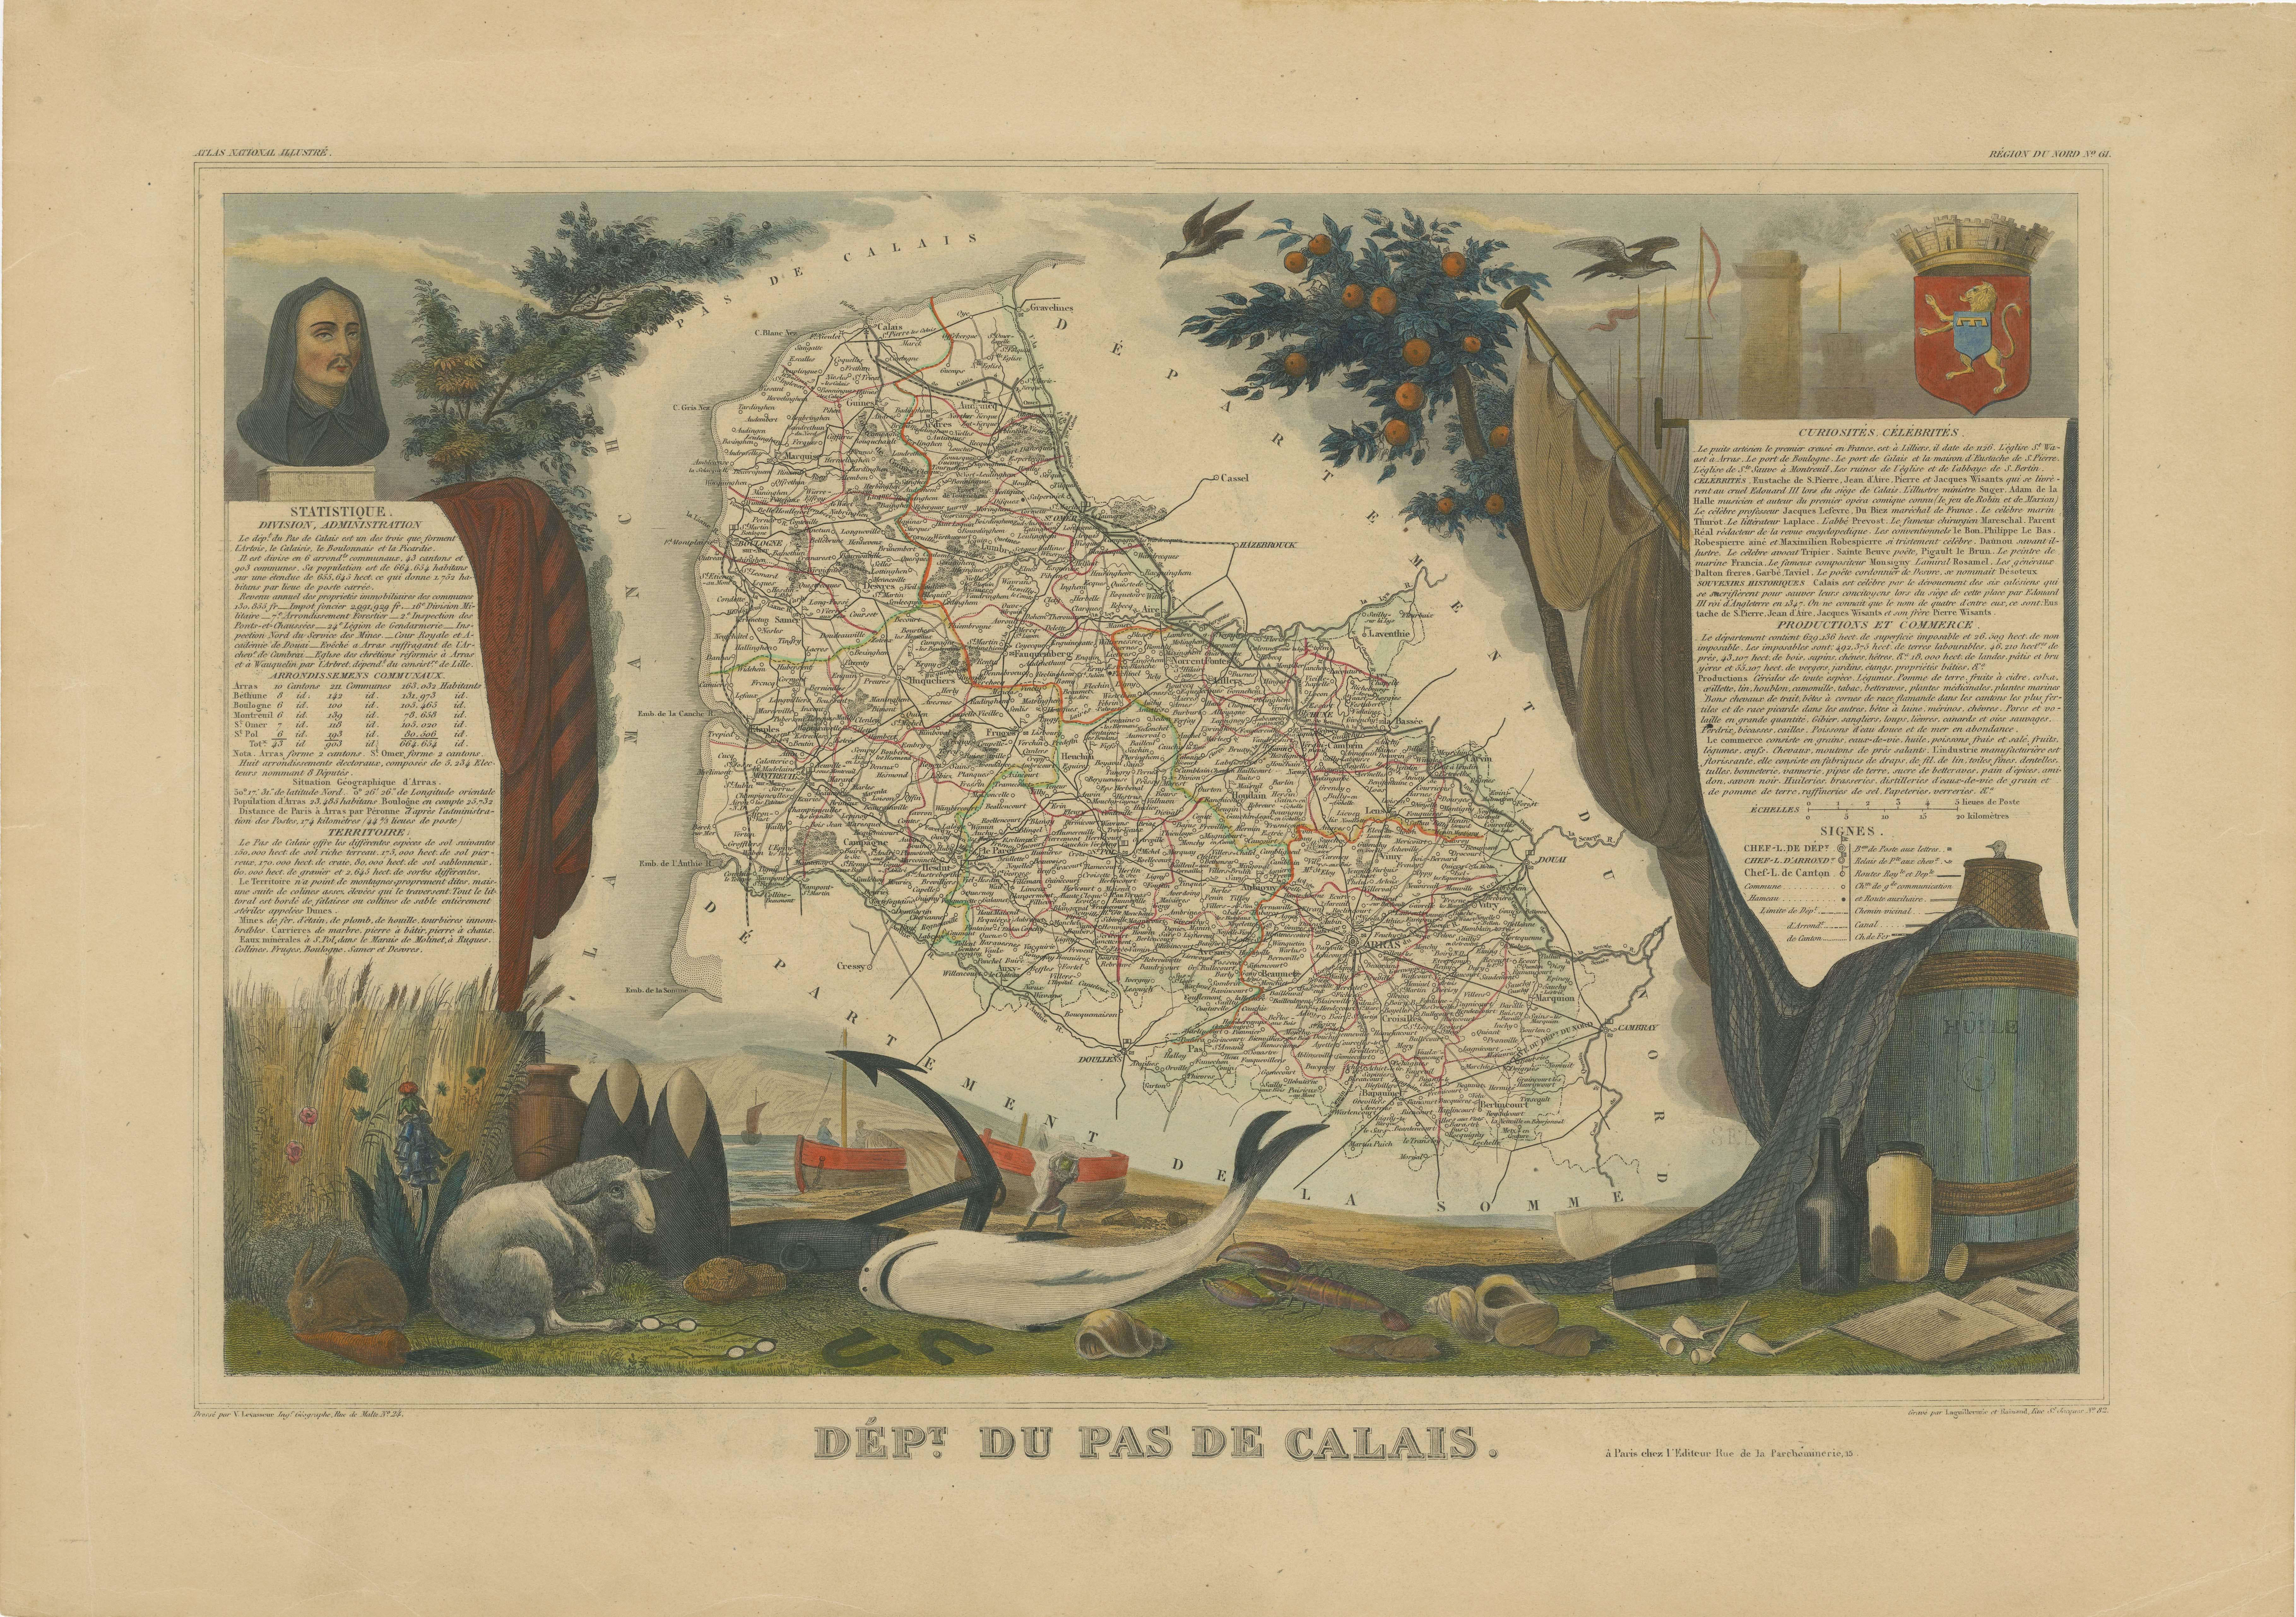 Antique map titled 'Dépt. du Pas de Calais'. Map of the French department of Calais, France. This area is known for producing Maroilles, a soft cheese made from cow’s milk and with a washed rind. The map proper is surrounded by elaborate decorative